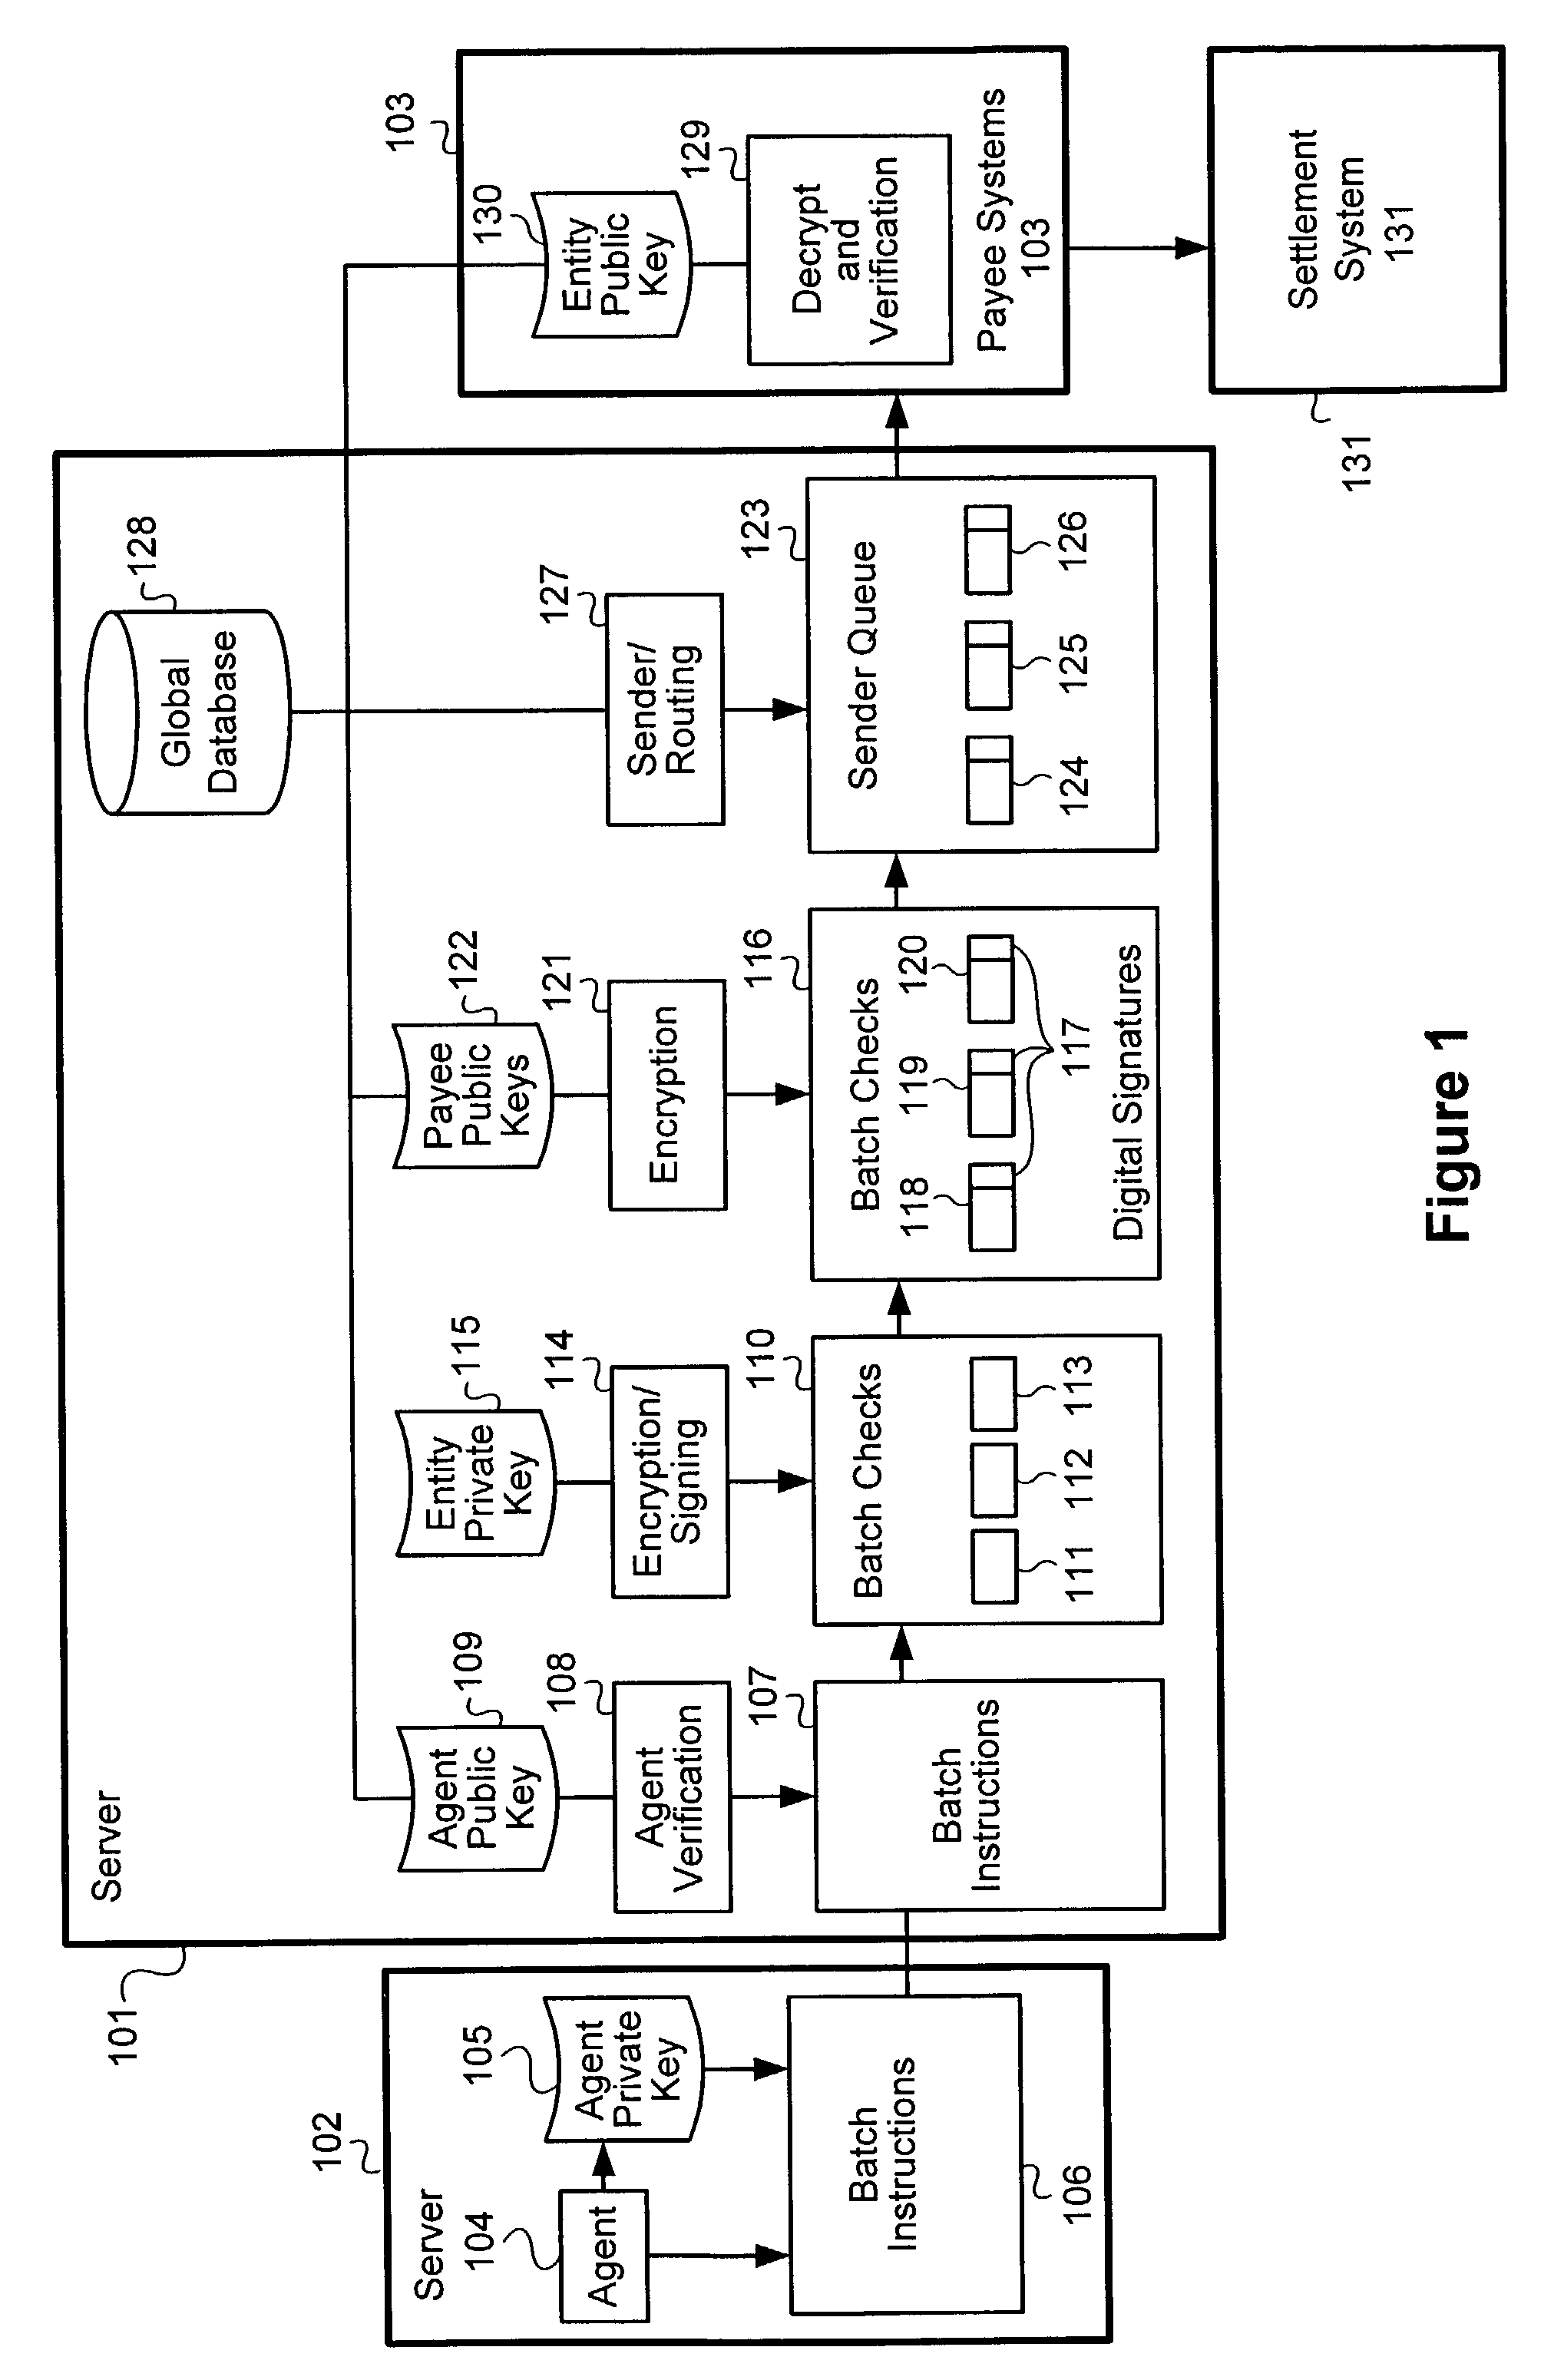 System and method for electronic authorization of batch checks